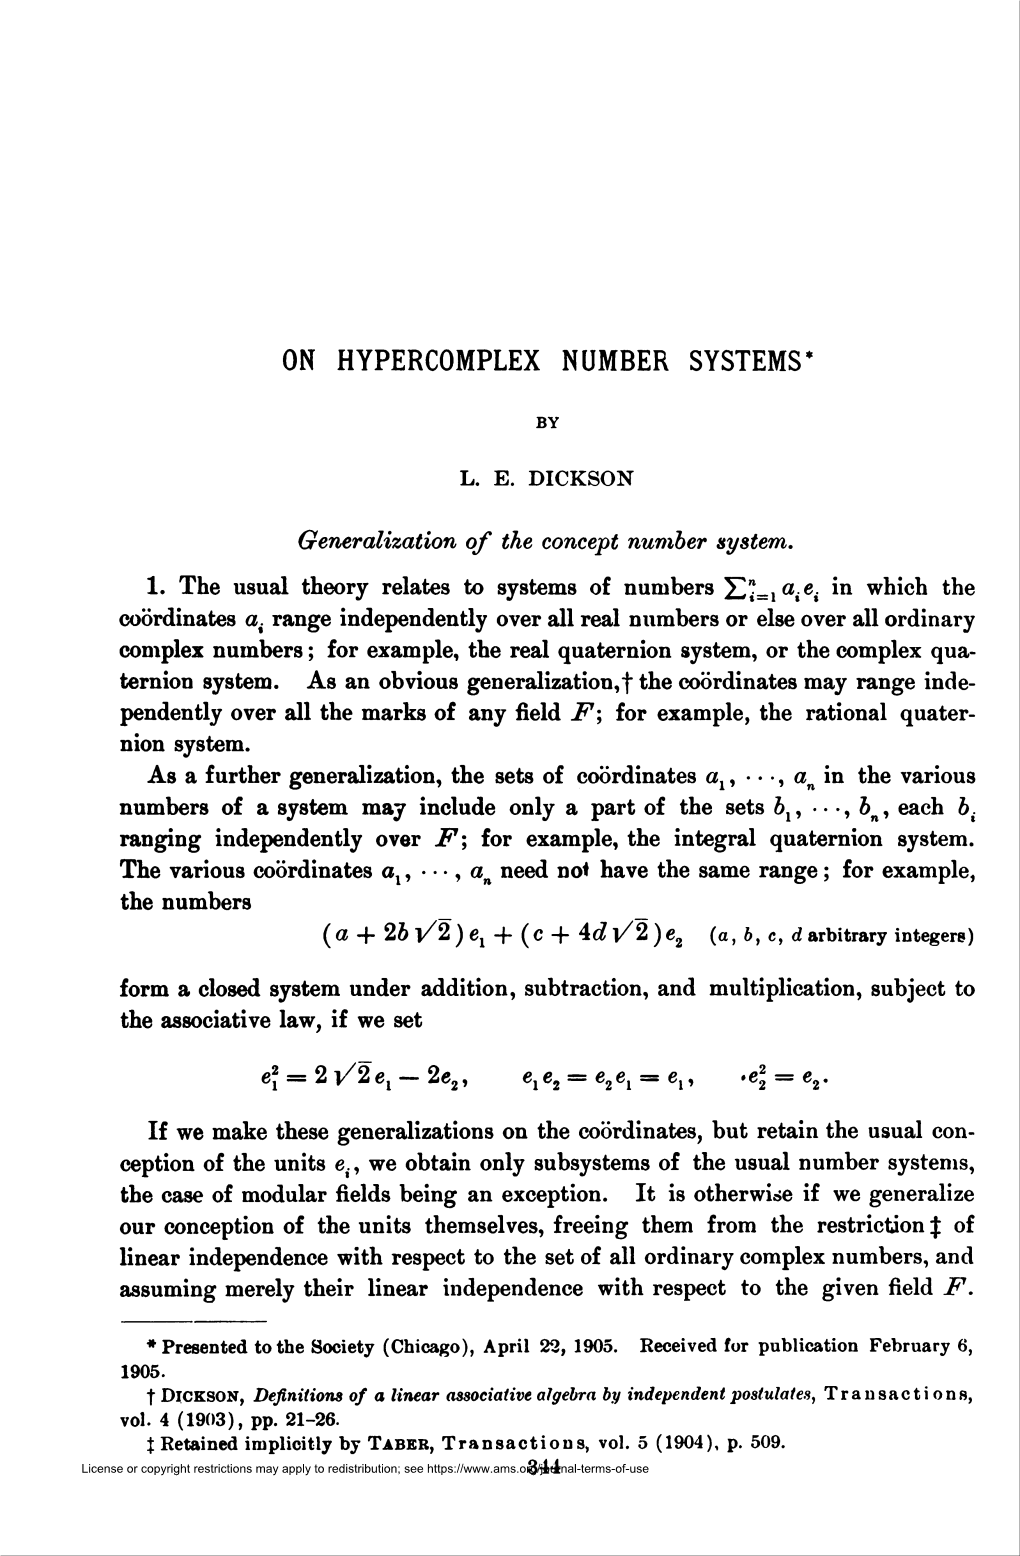 On Hypercomplex Number Systems*